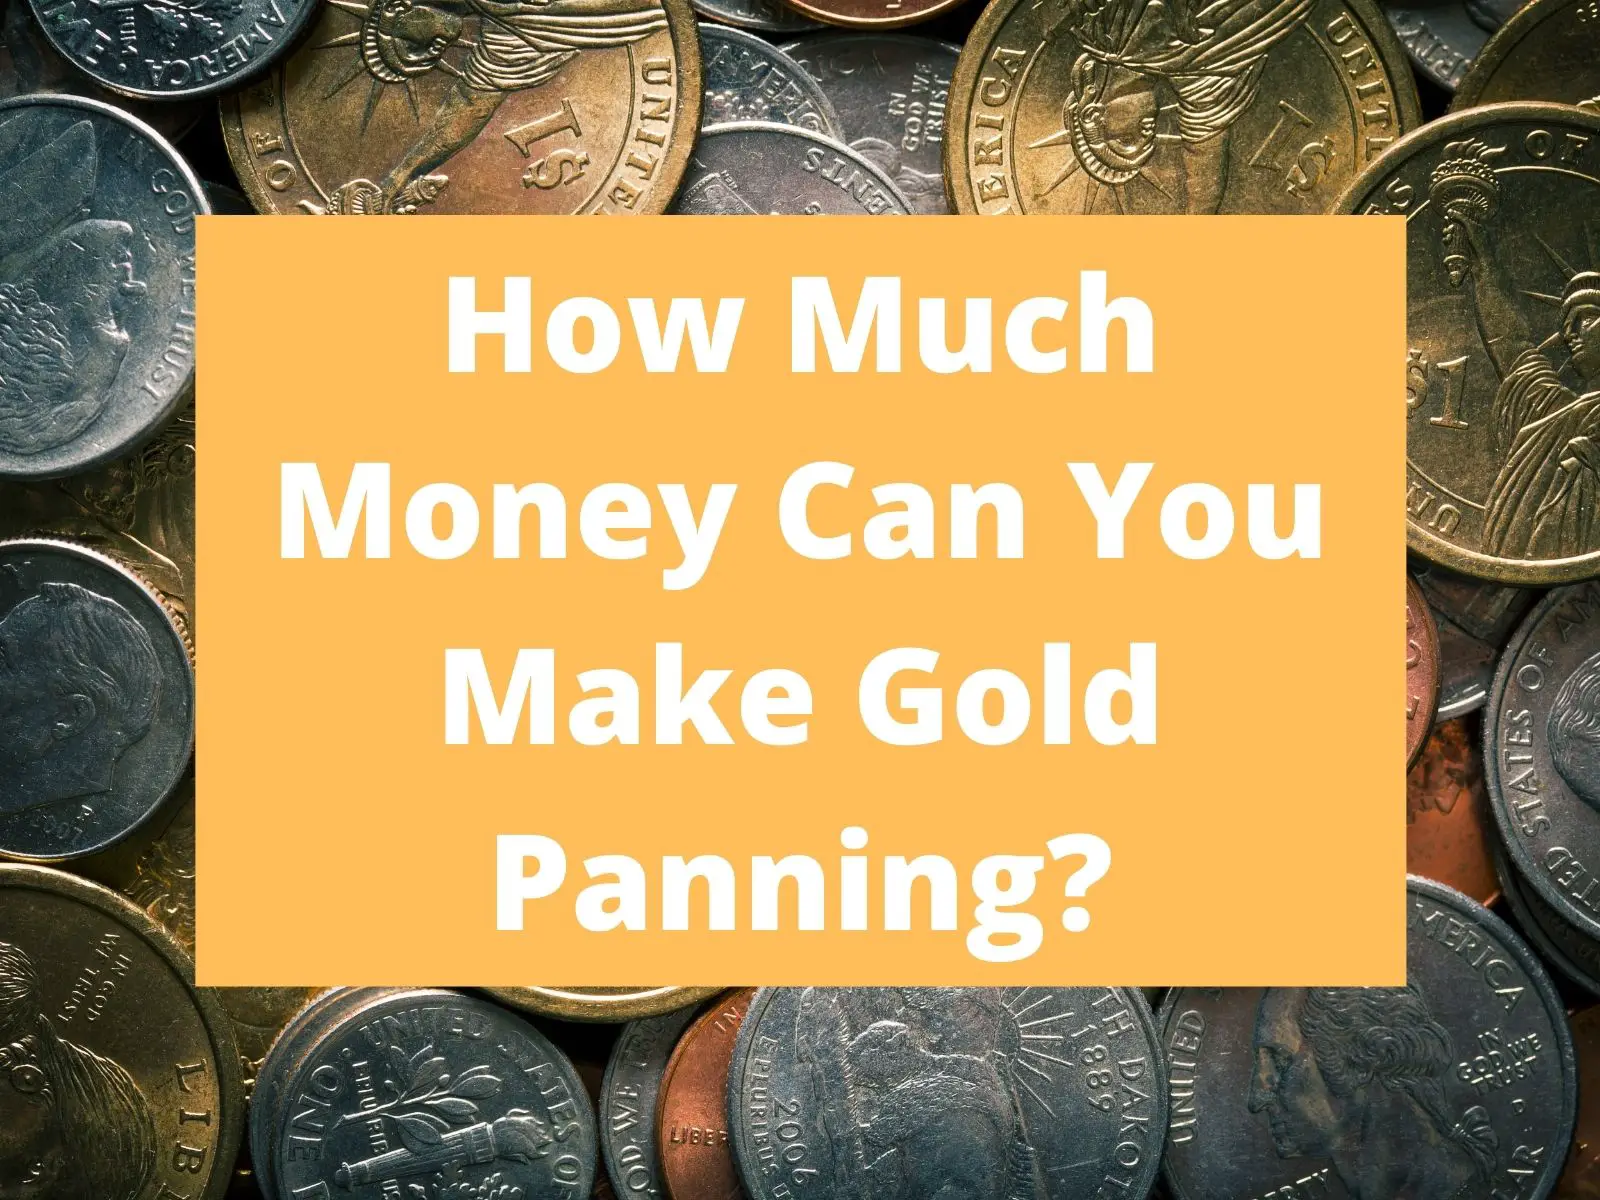 how much gold can you pan in a day